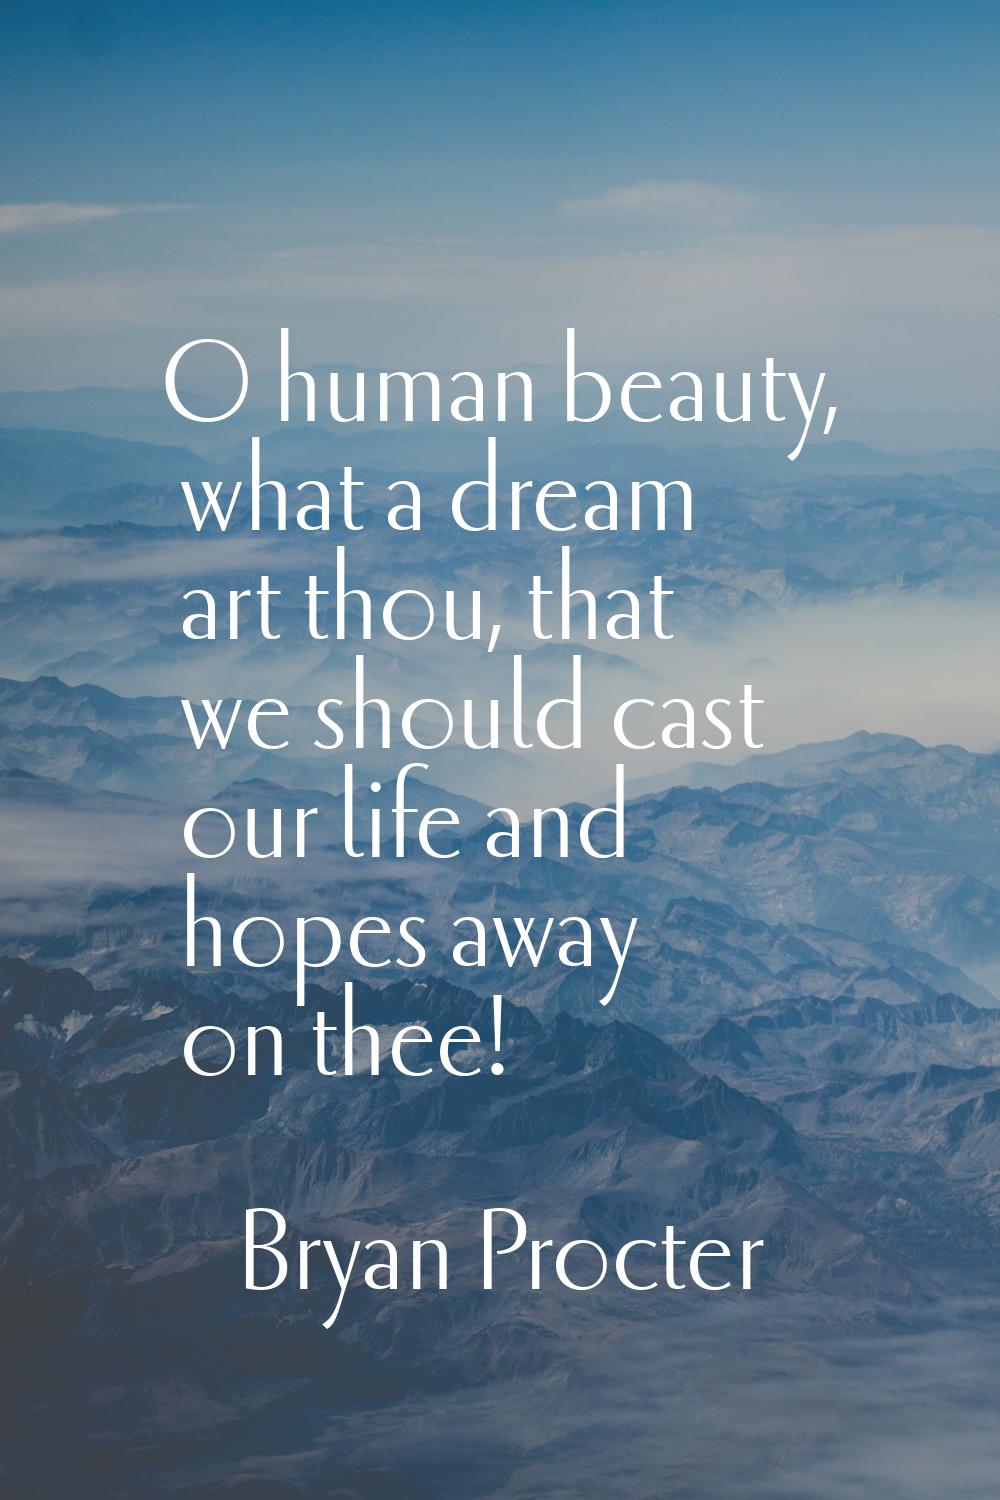 O human beauty, what a dream art thou, that we should cast our life and hopes away on thee!